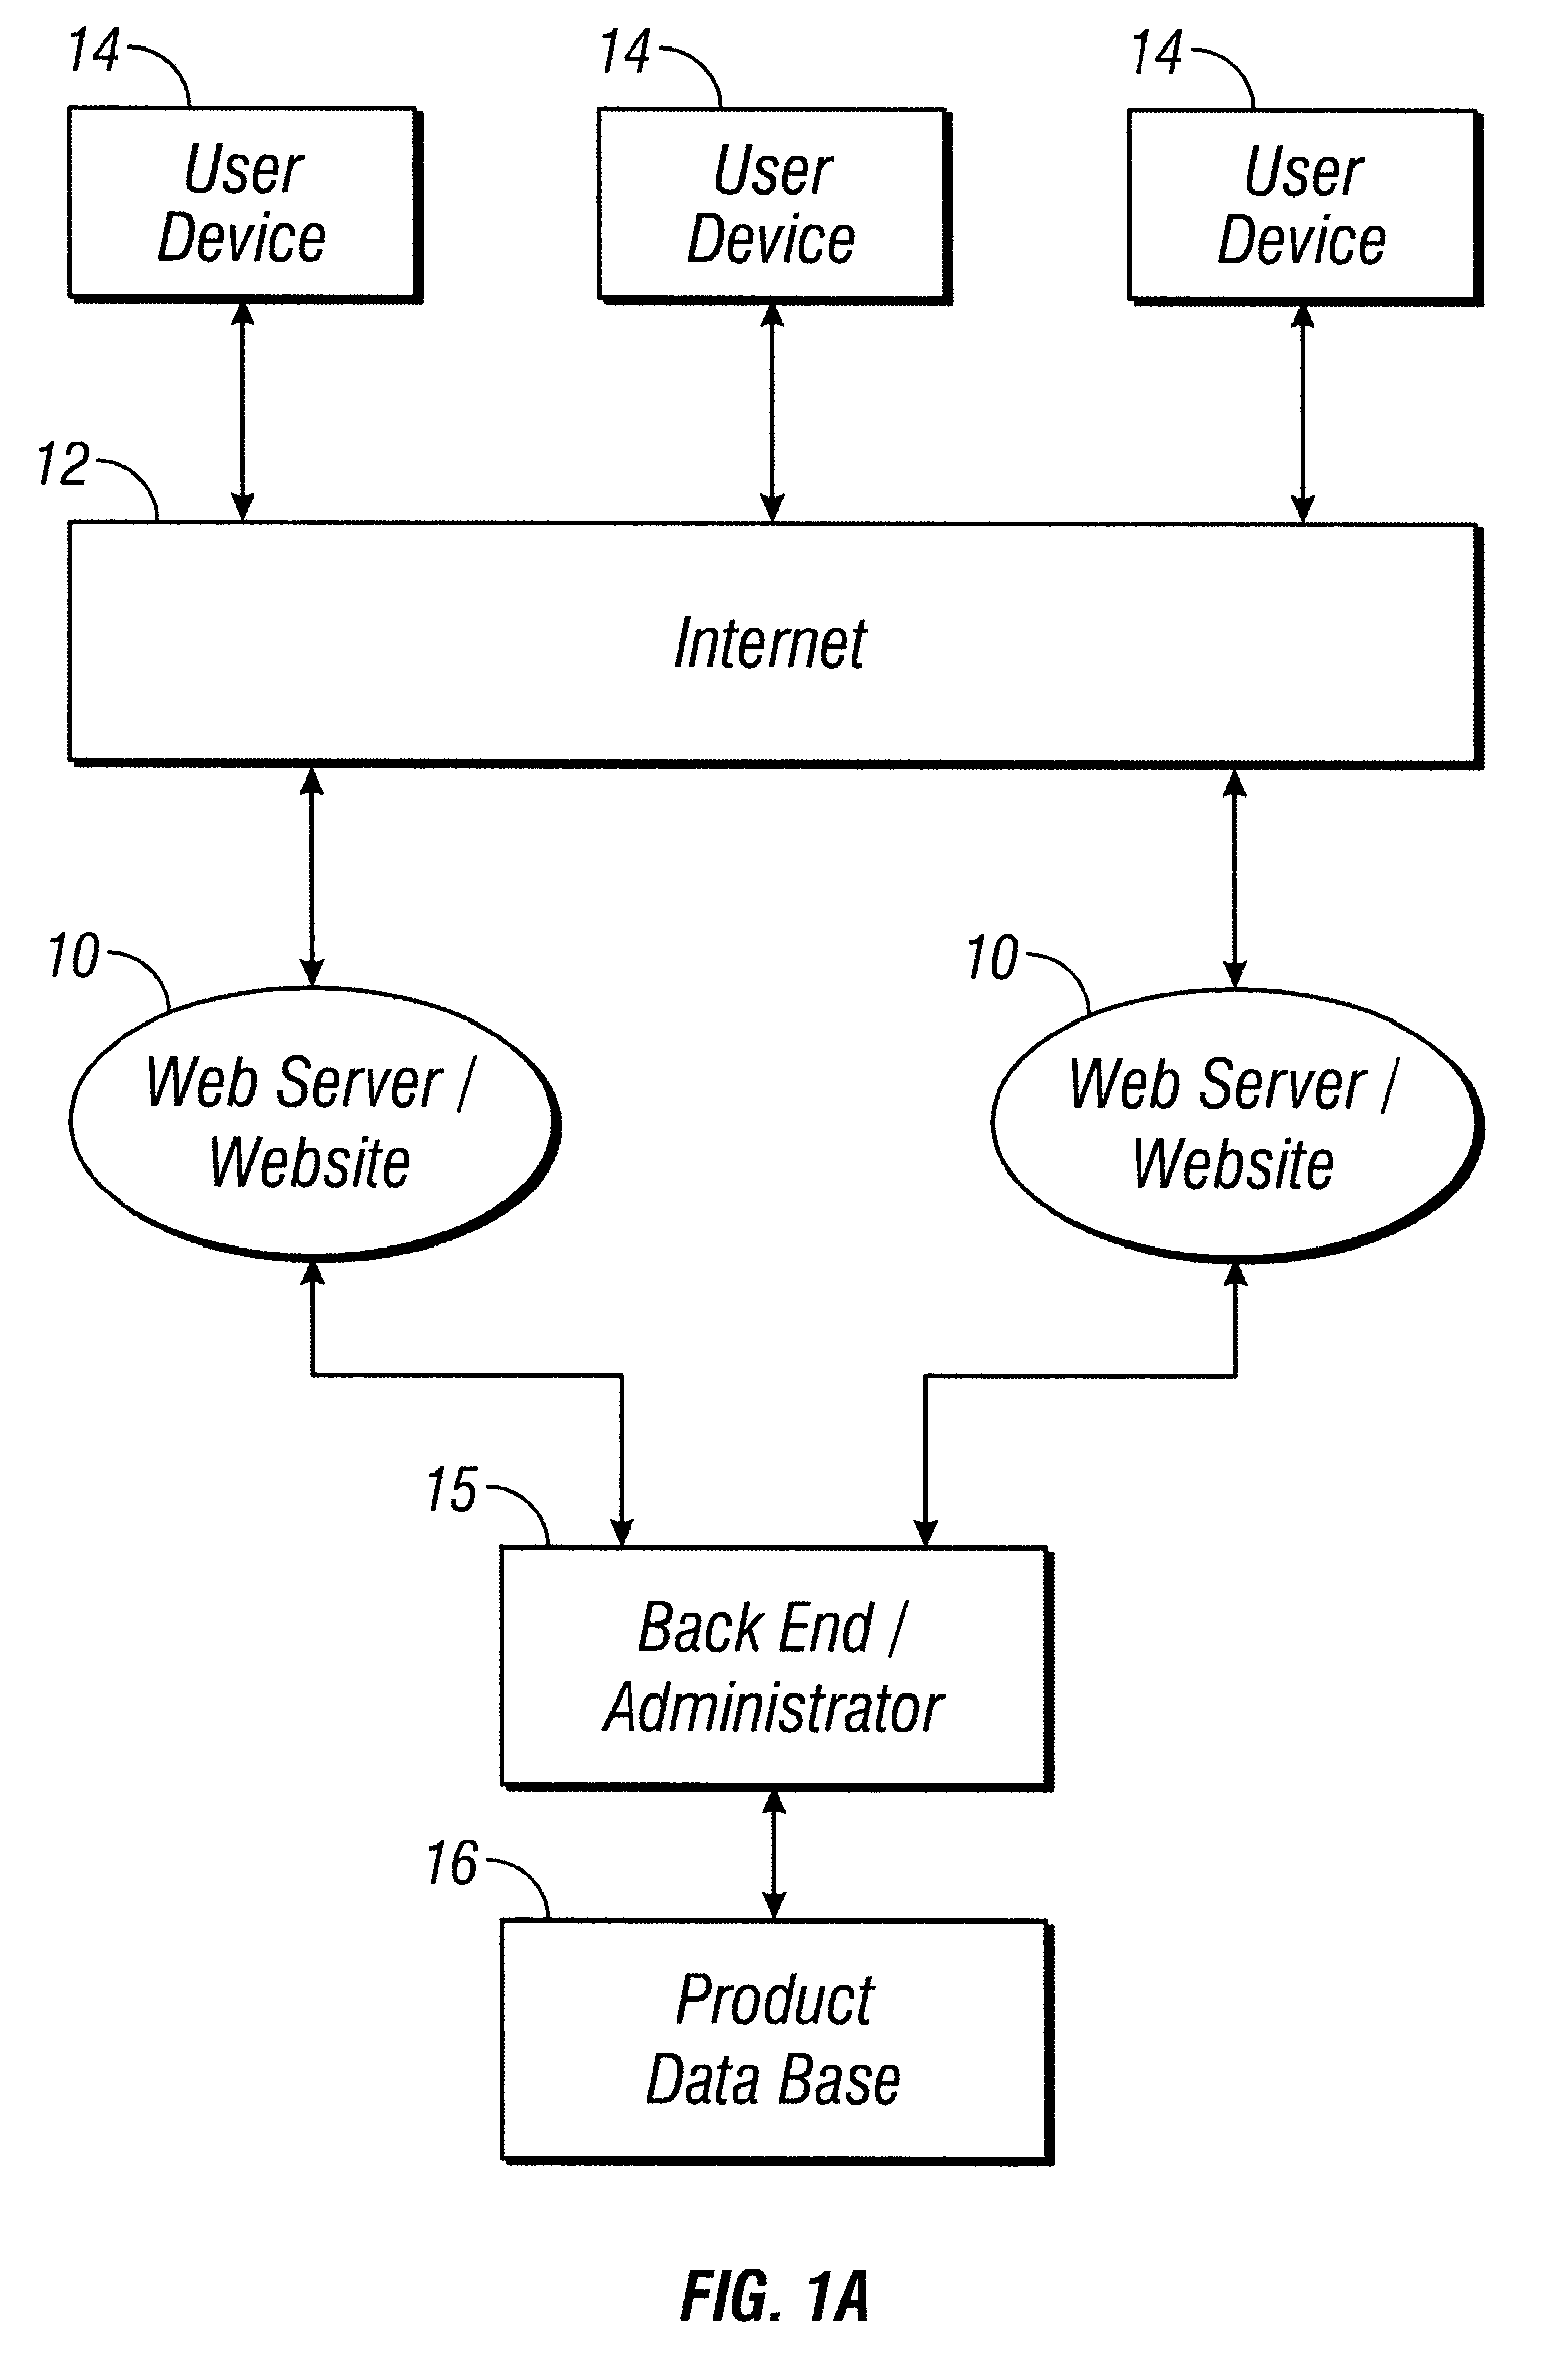 Online ordering system and method for keyed devices